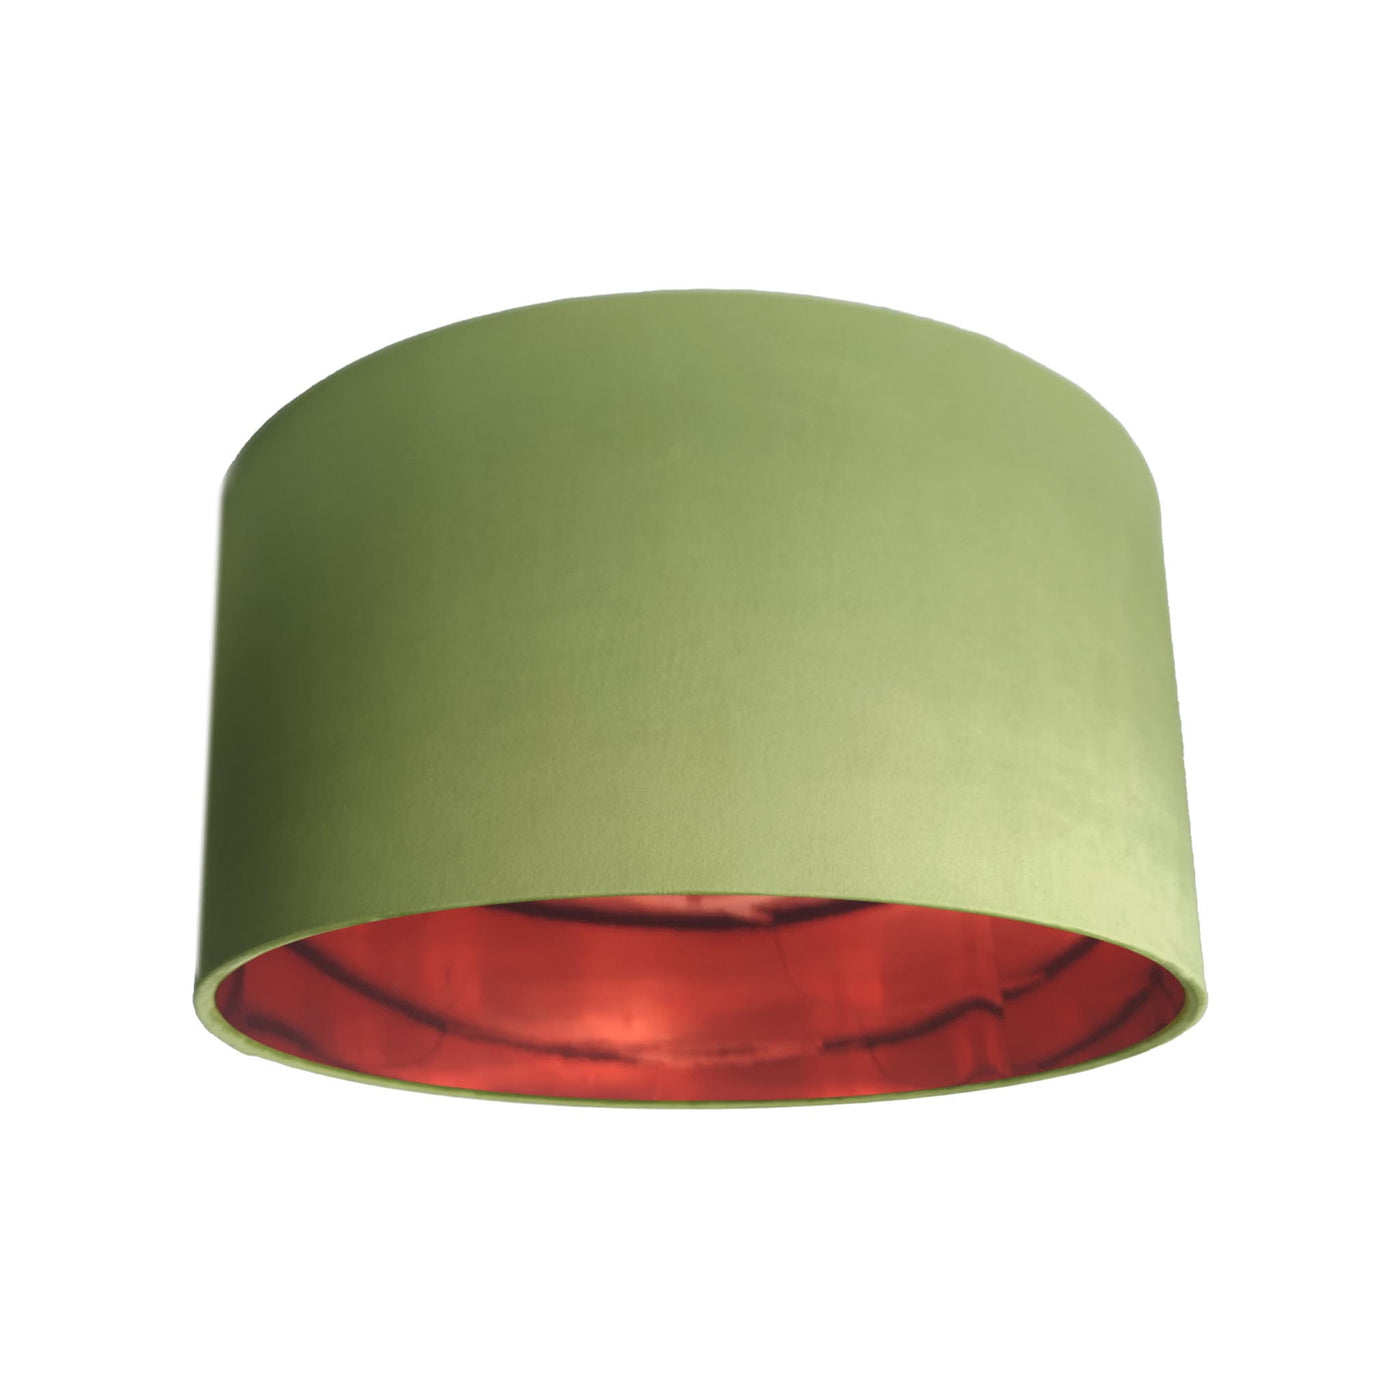 Olive Green Velvet Lampshade with Mirror Copper Lining